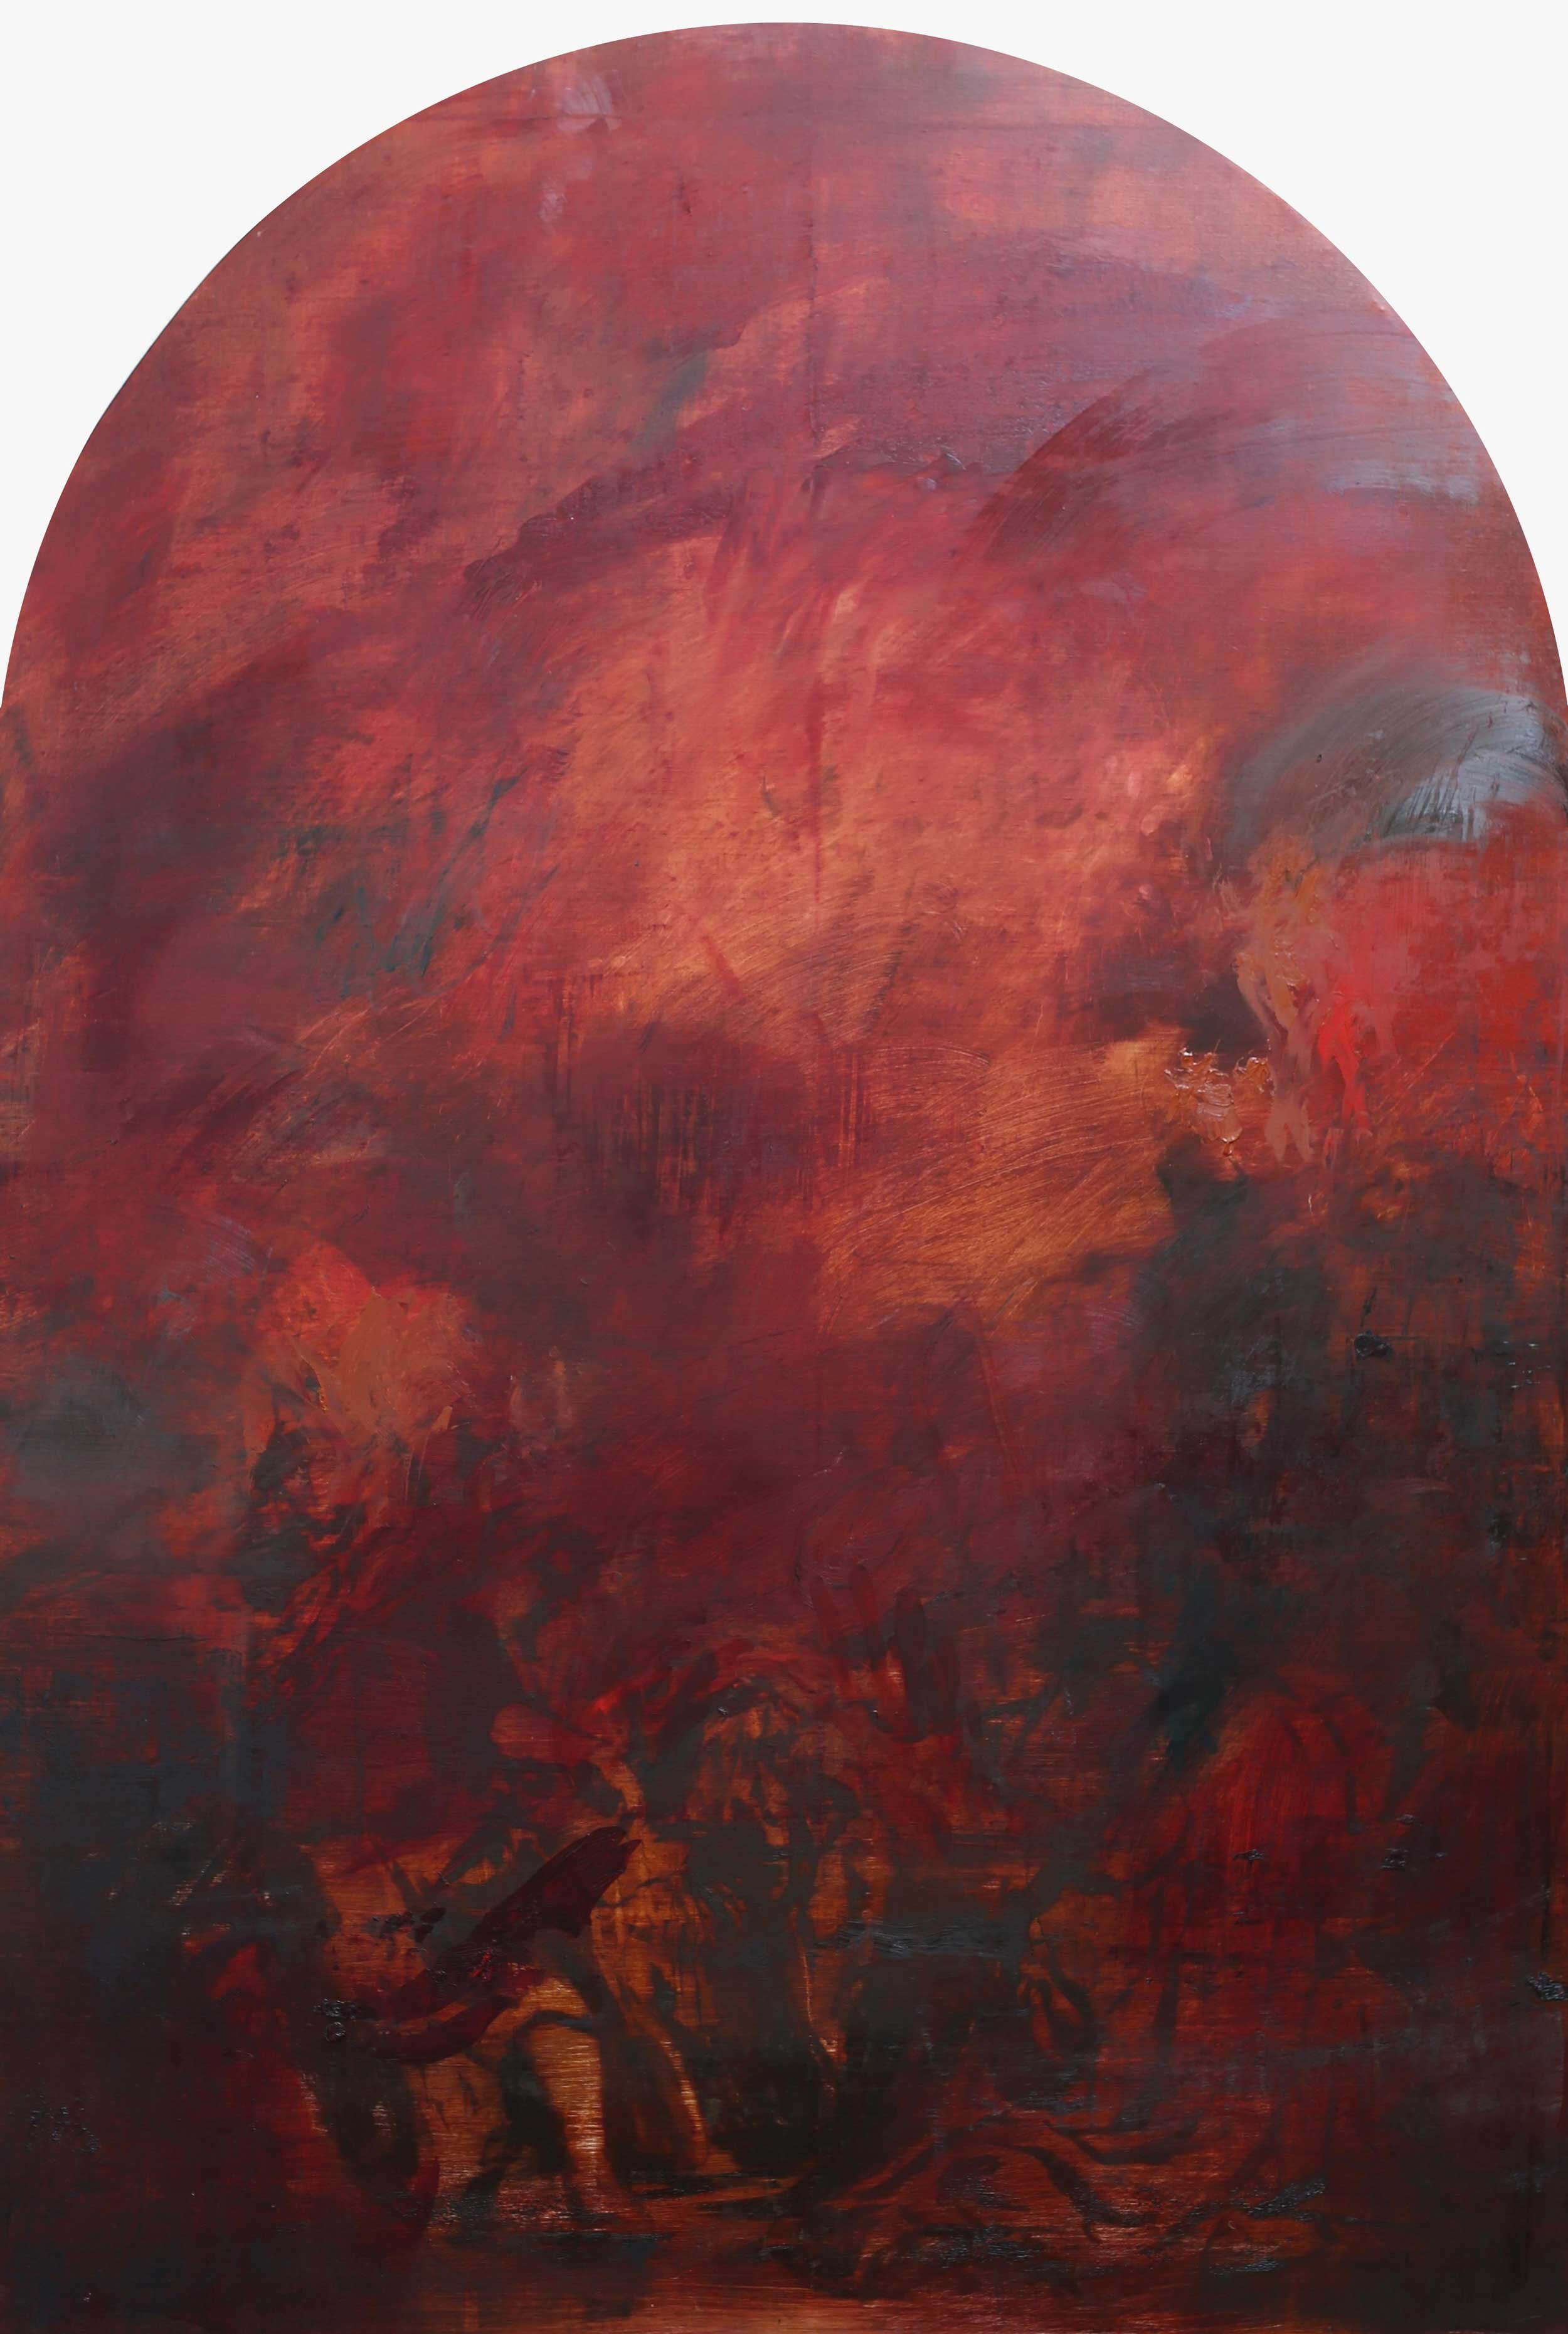 The Assumption with Alizarin Crimson, after Rubens, 220x150cm